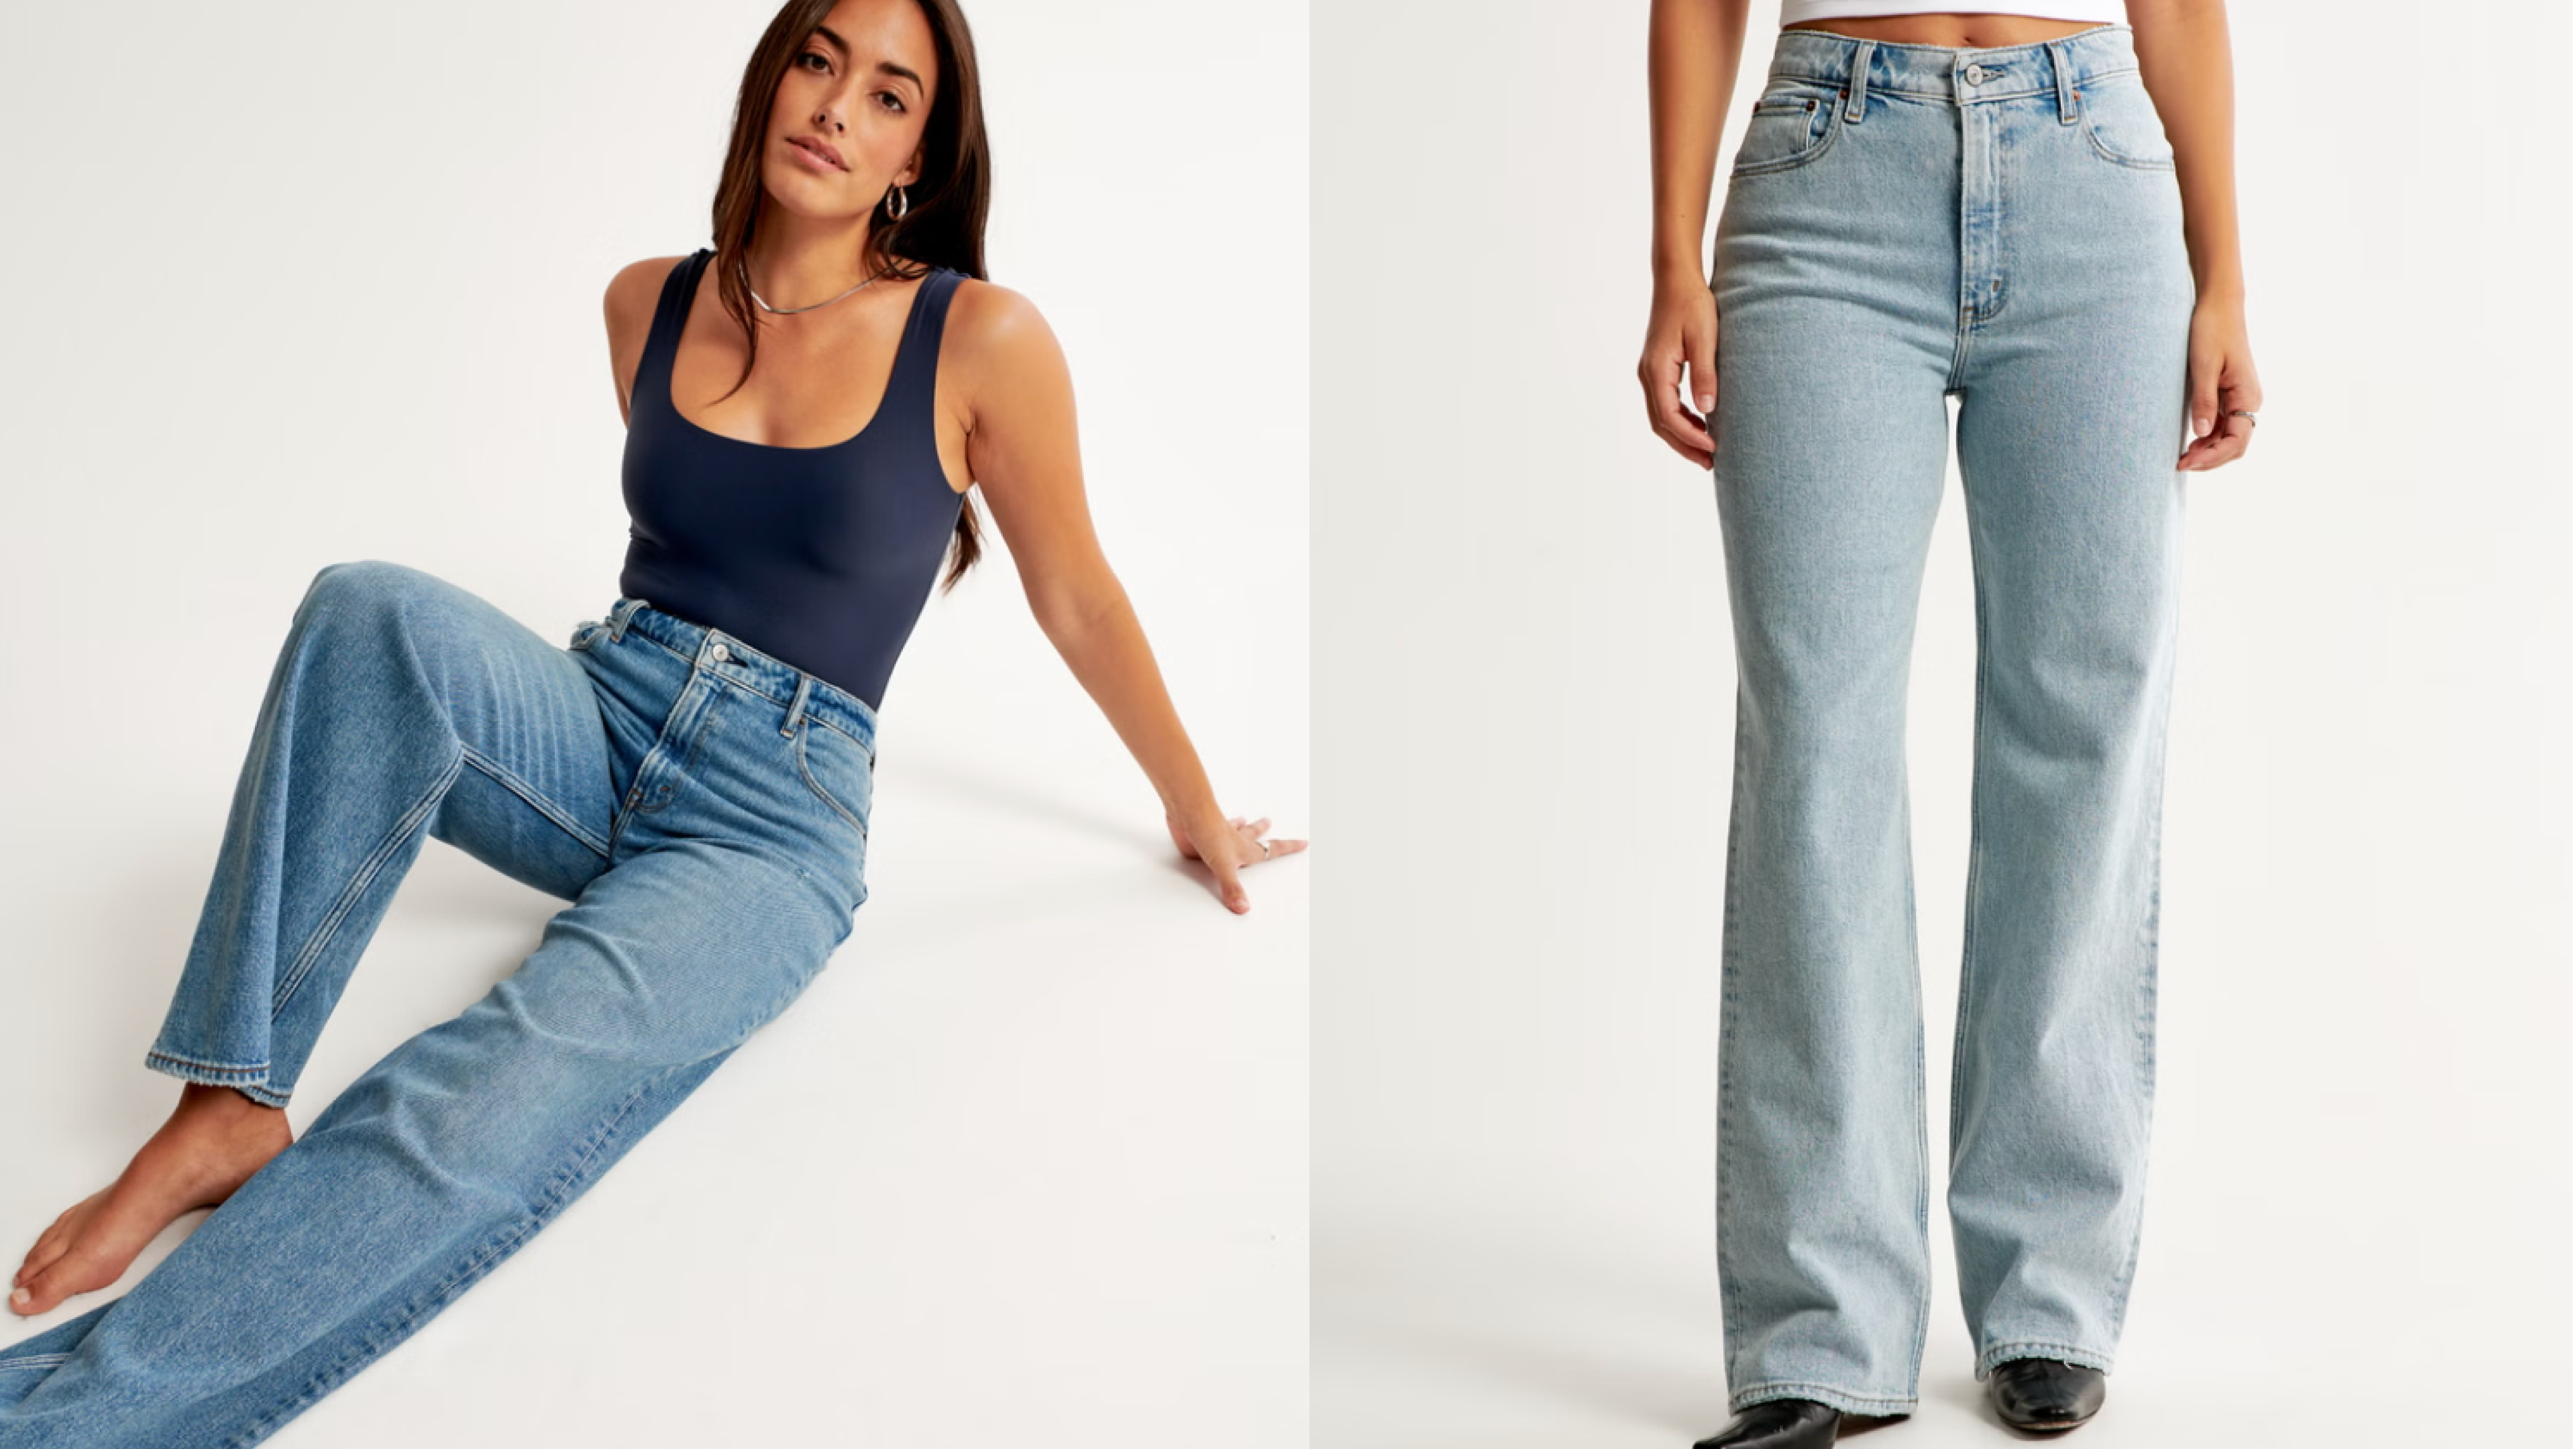 abercrombie & fitch curve love jeans